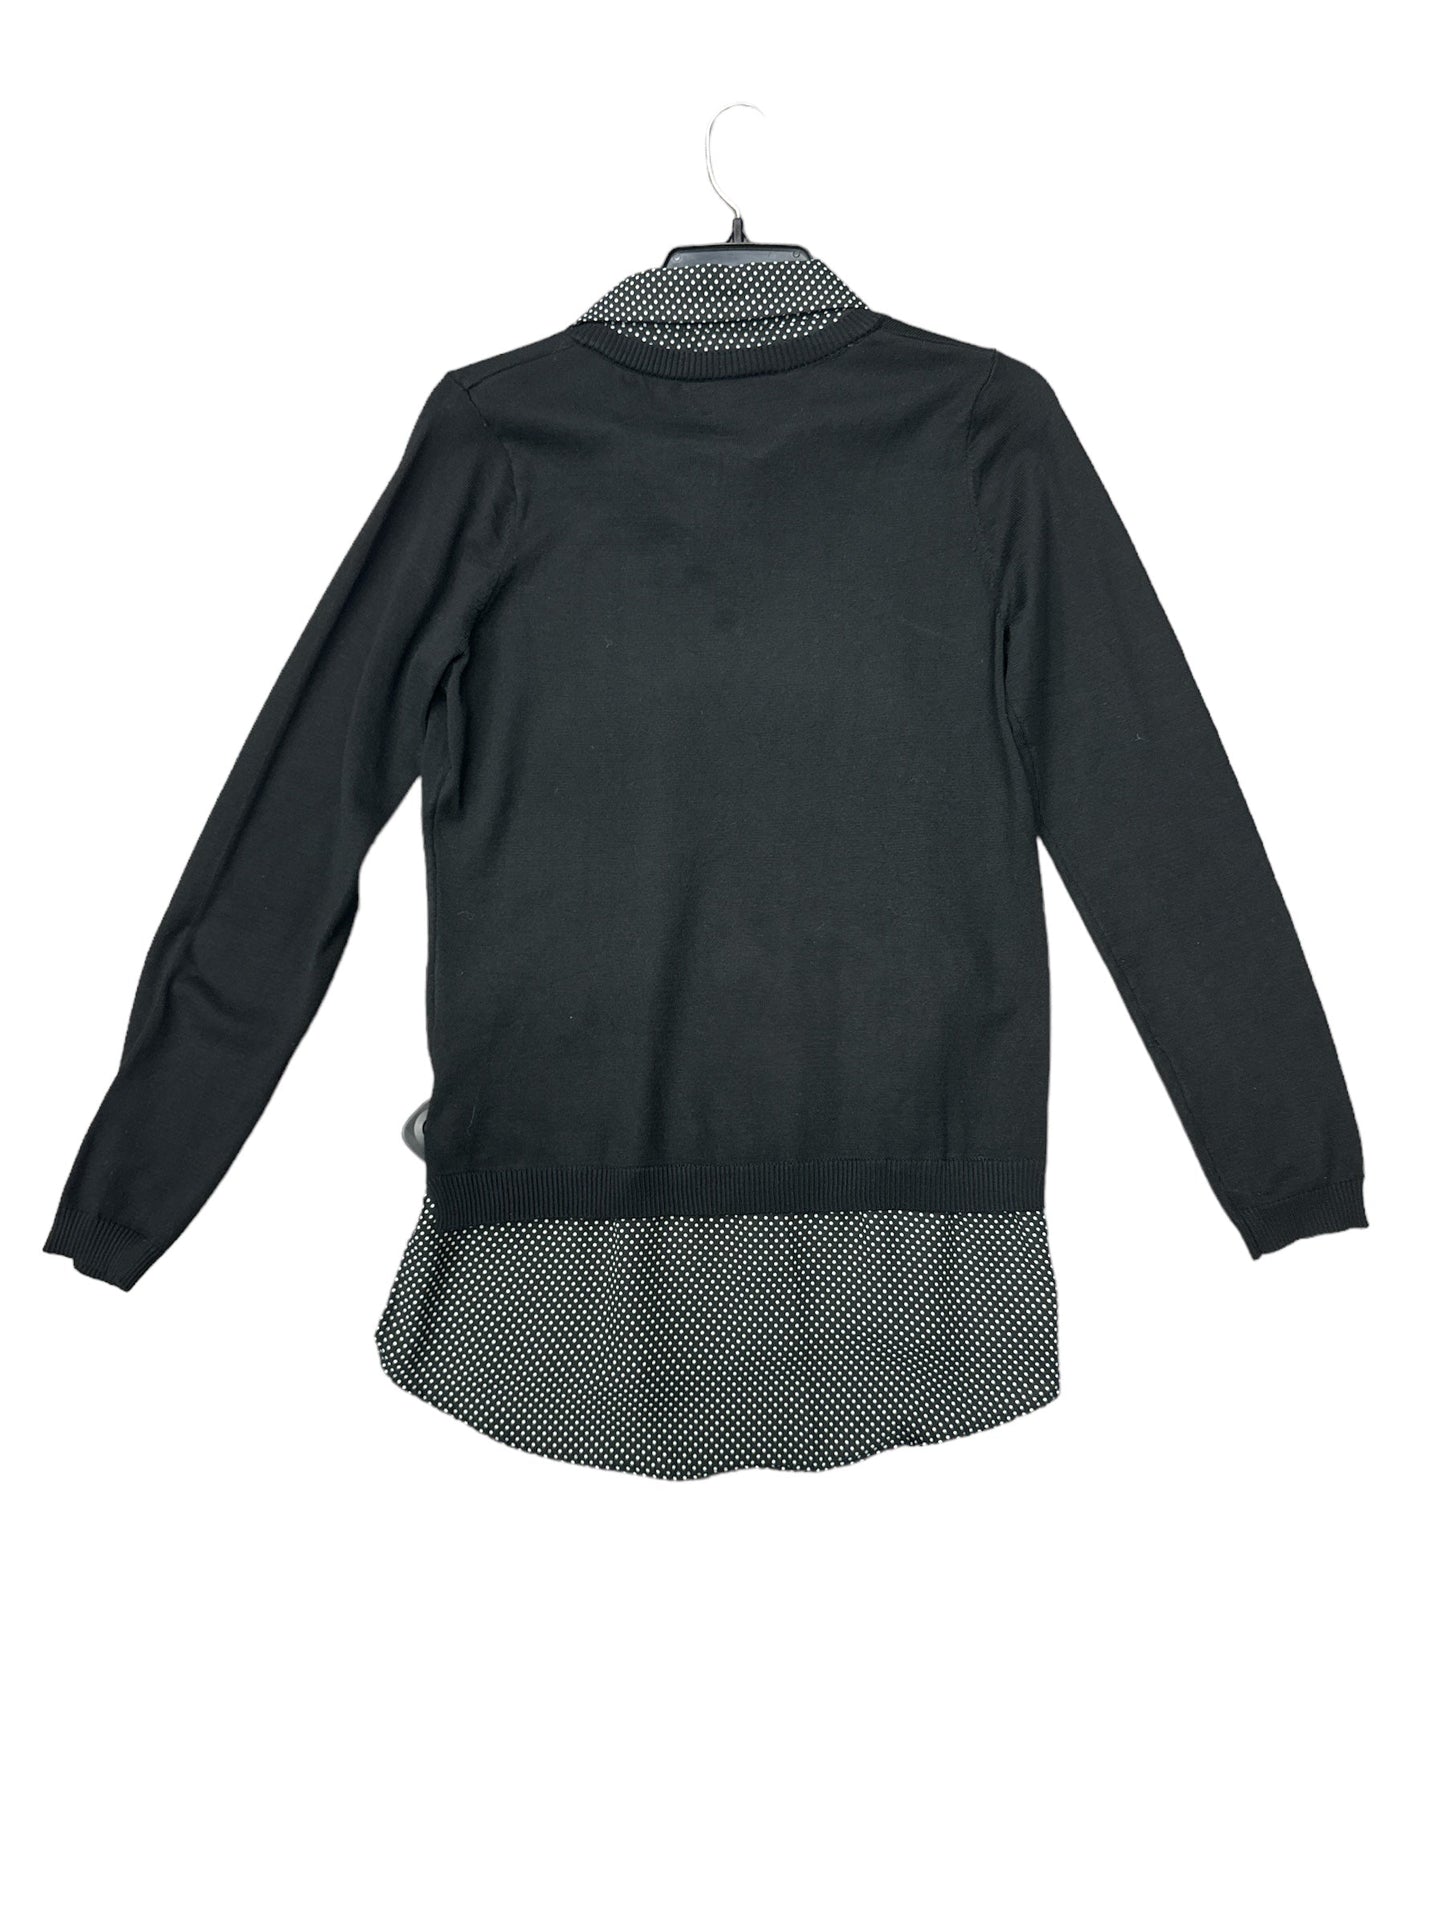 Black Top Long Sleeve Adrianna Papell, Size S